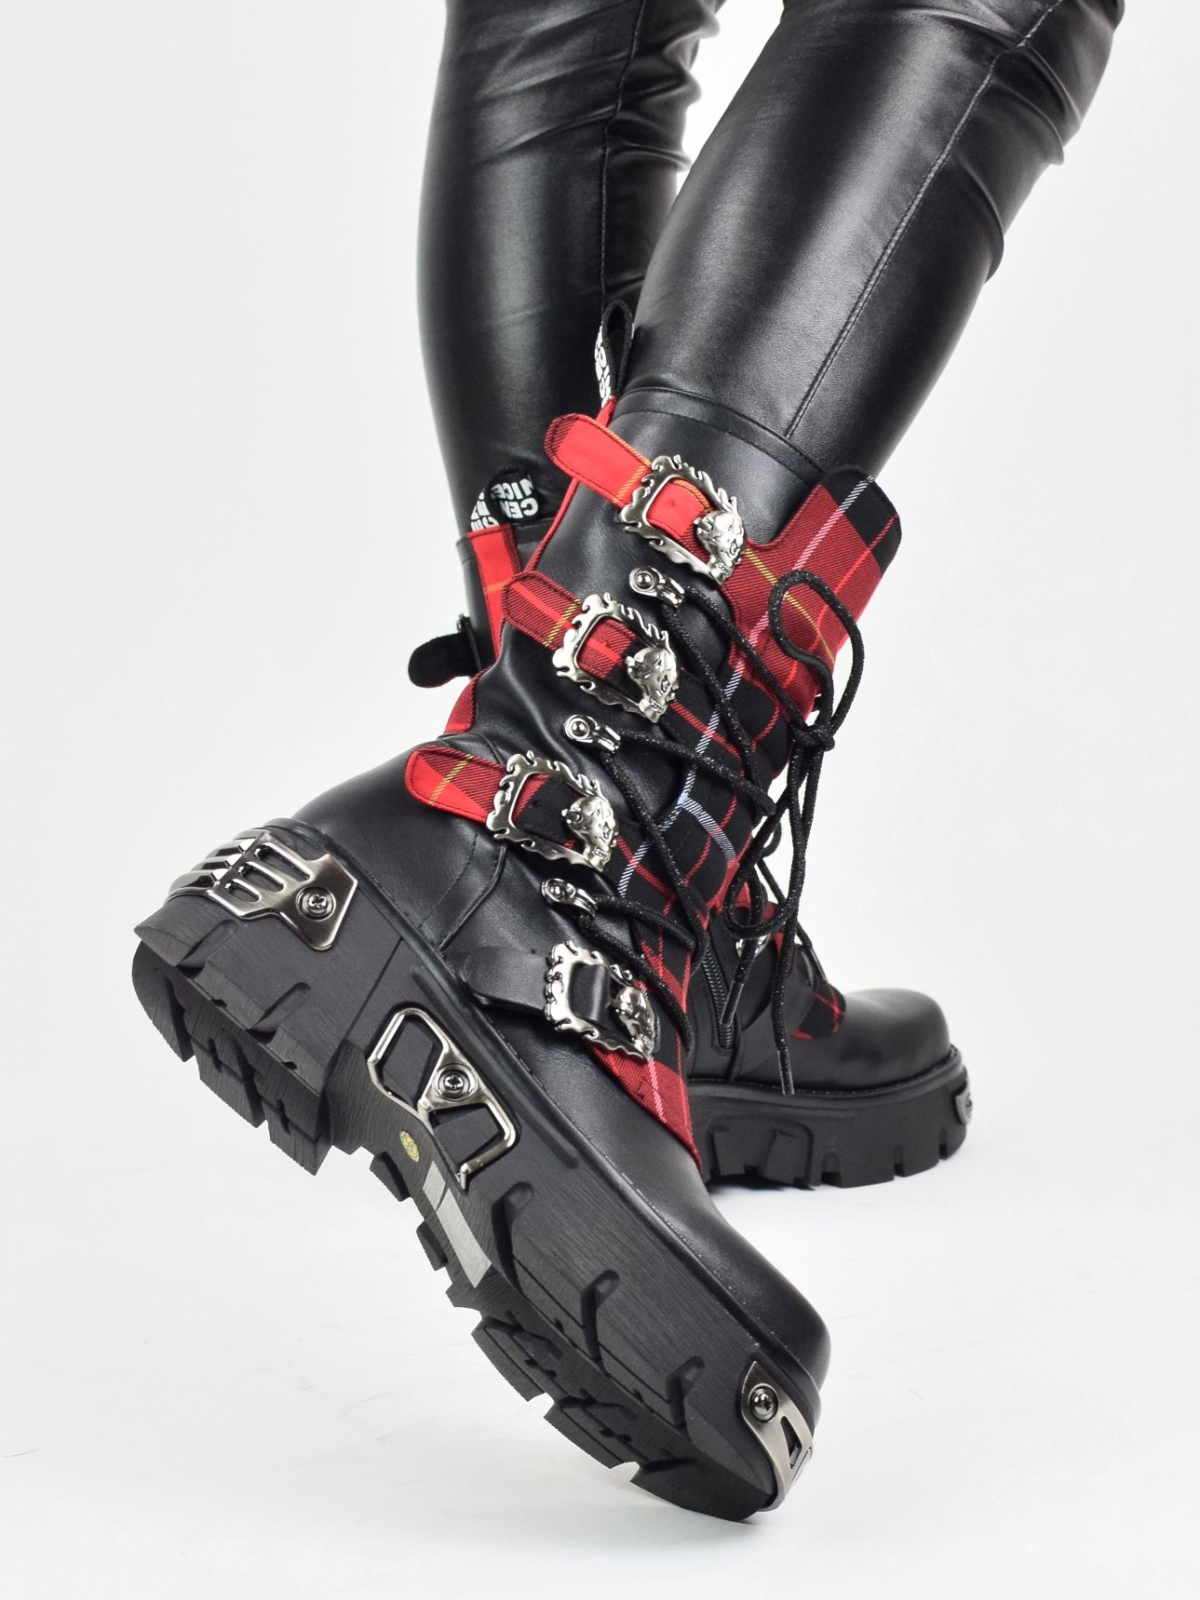 Exclusive design cyberpunk style boots with metal details in black & red